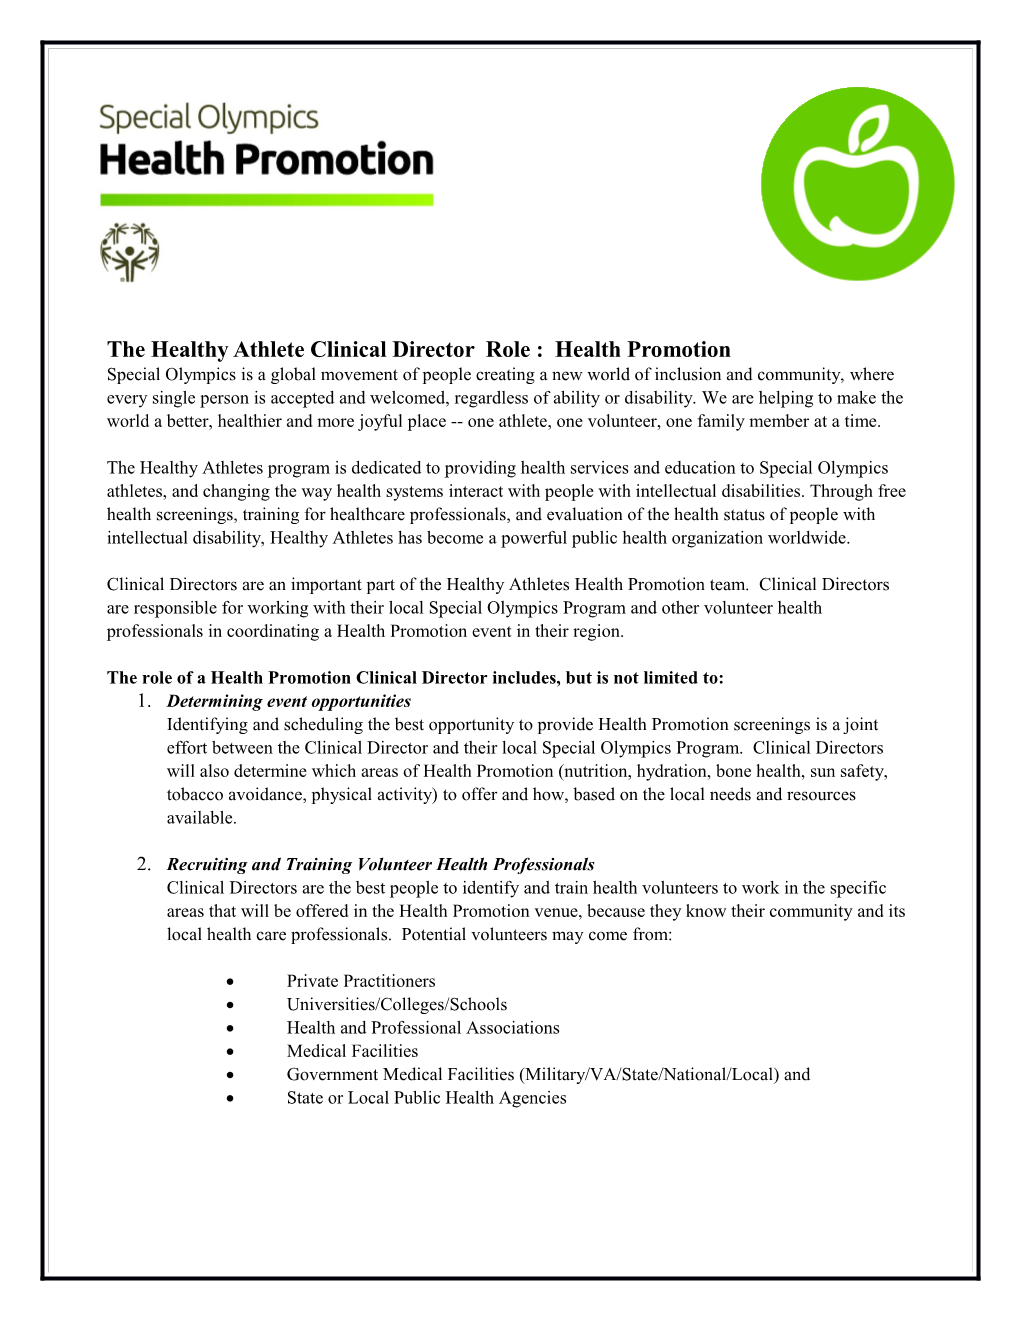 The Healthy Athlete Clinical Director Role : Health Promotion